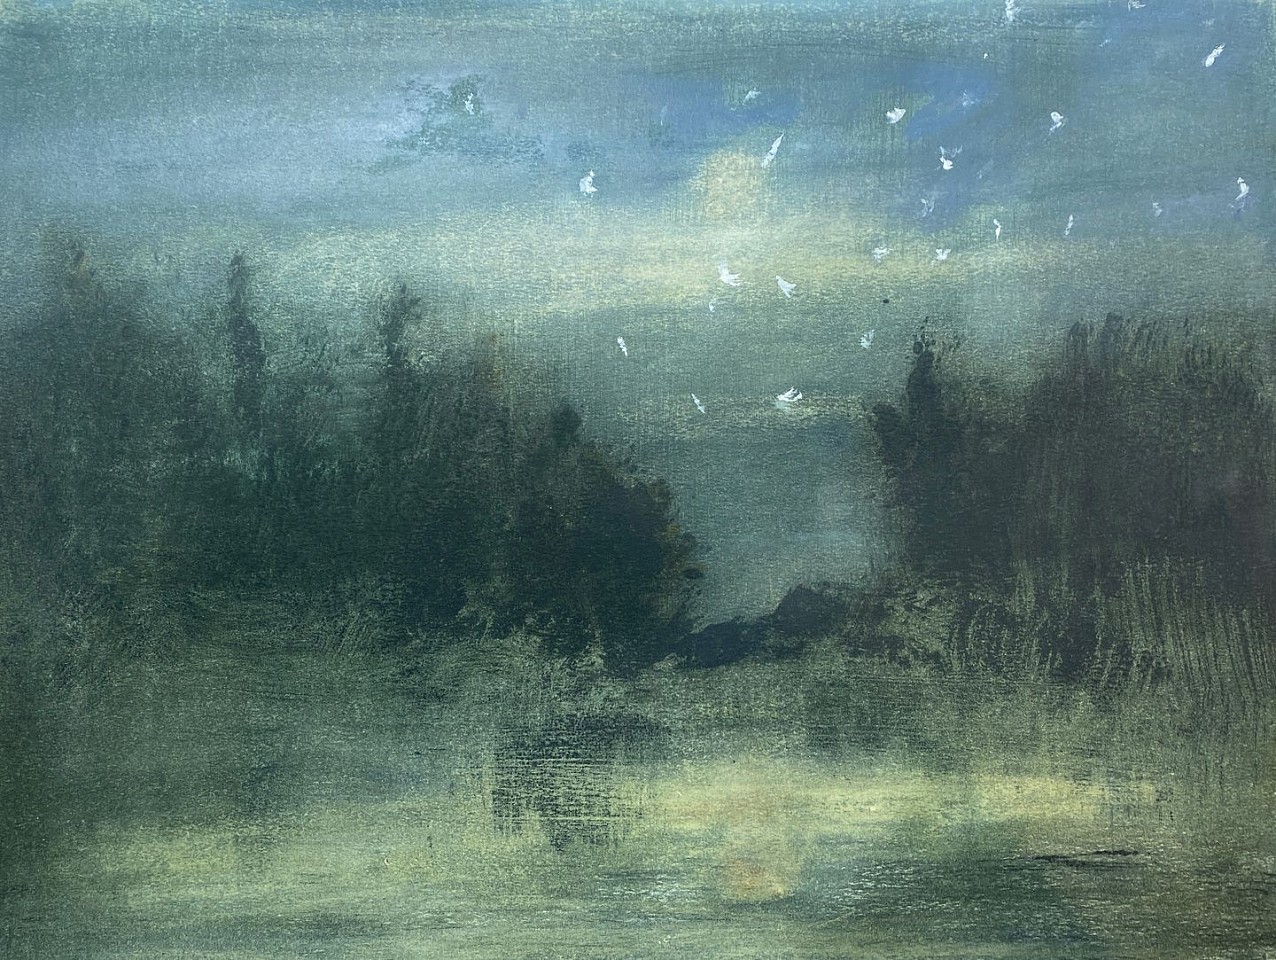 Poogy Bjerklie
As Night Falls #1, 2023
BJE182
oil on paper, 18 x 24 inches